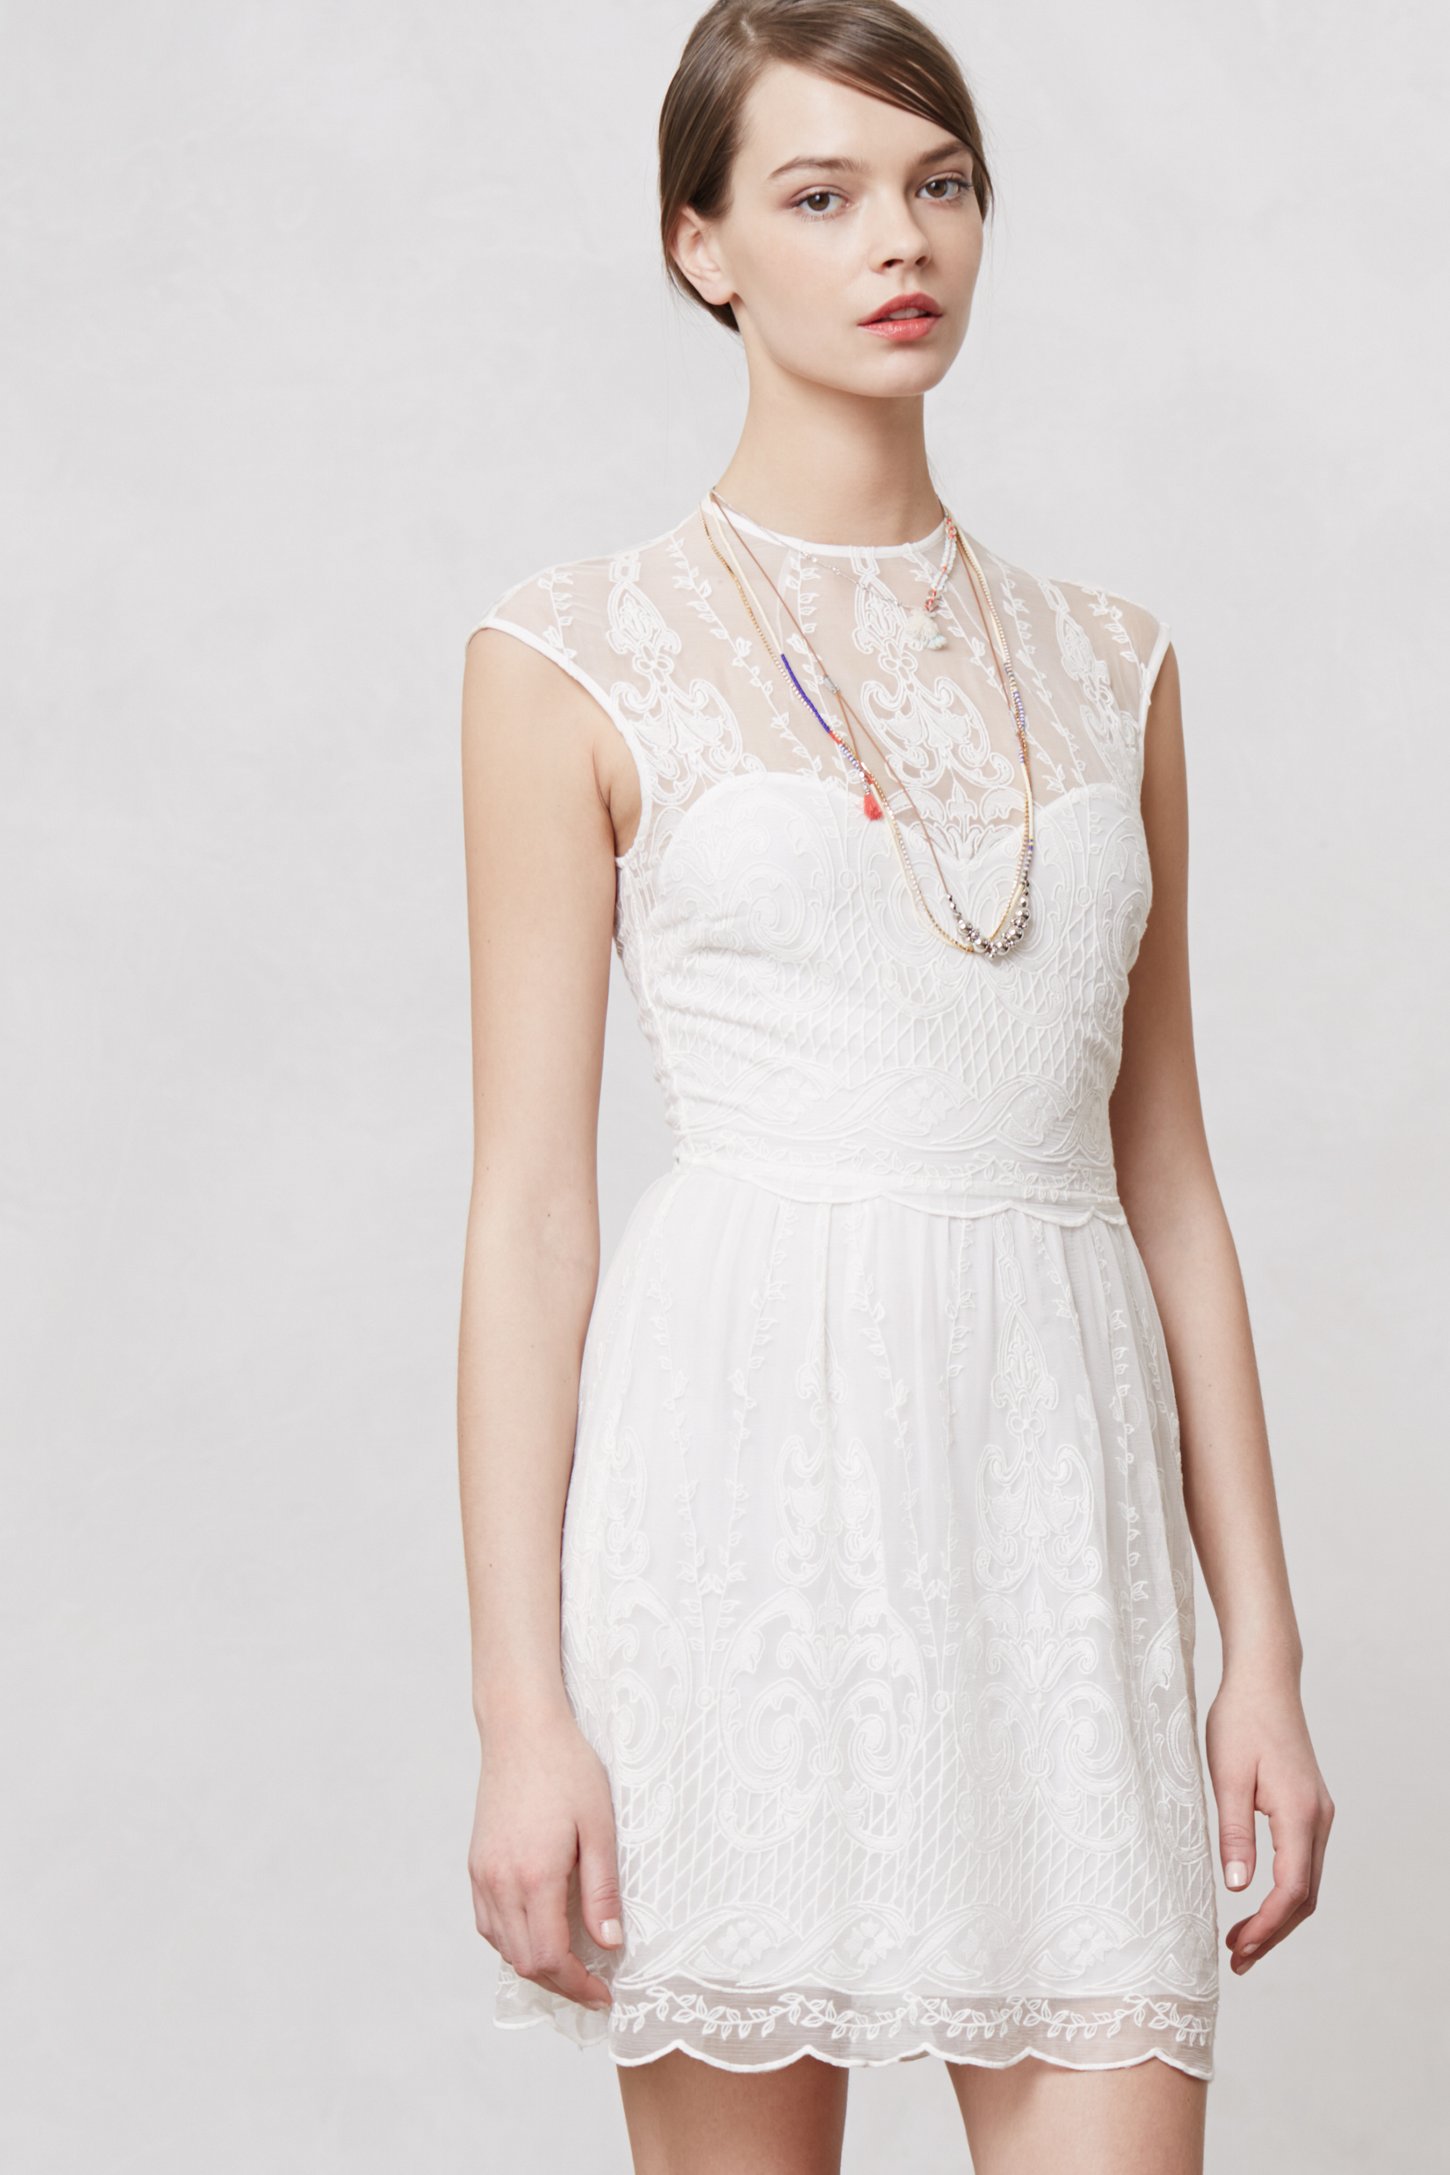 Lyst - Dolce Vita Kenna Lace Dress in White